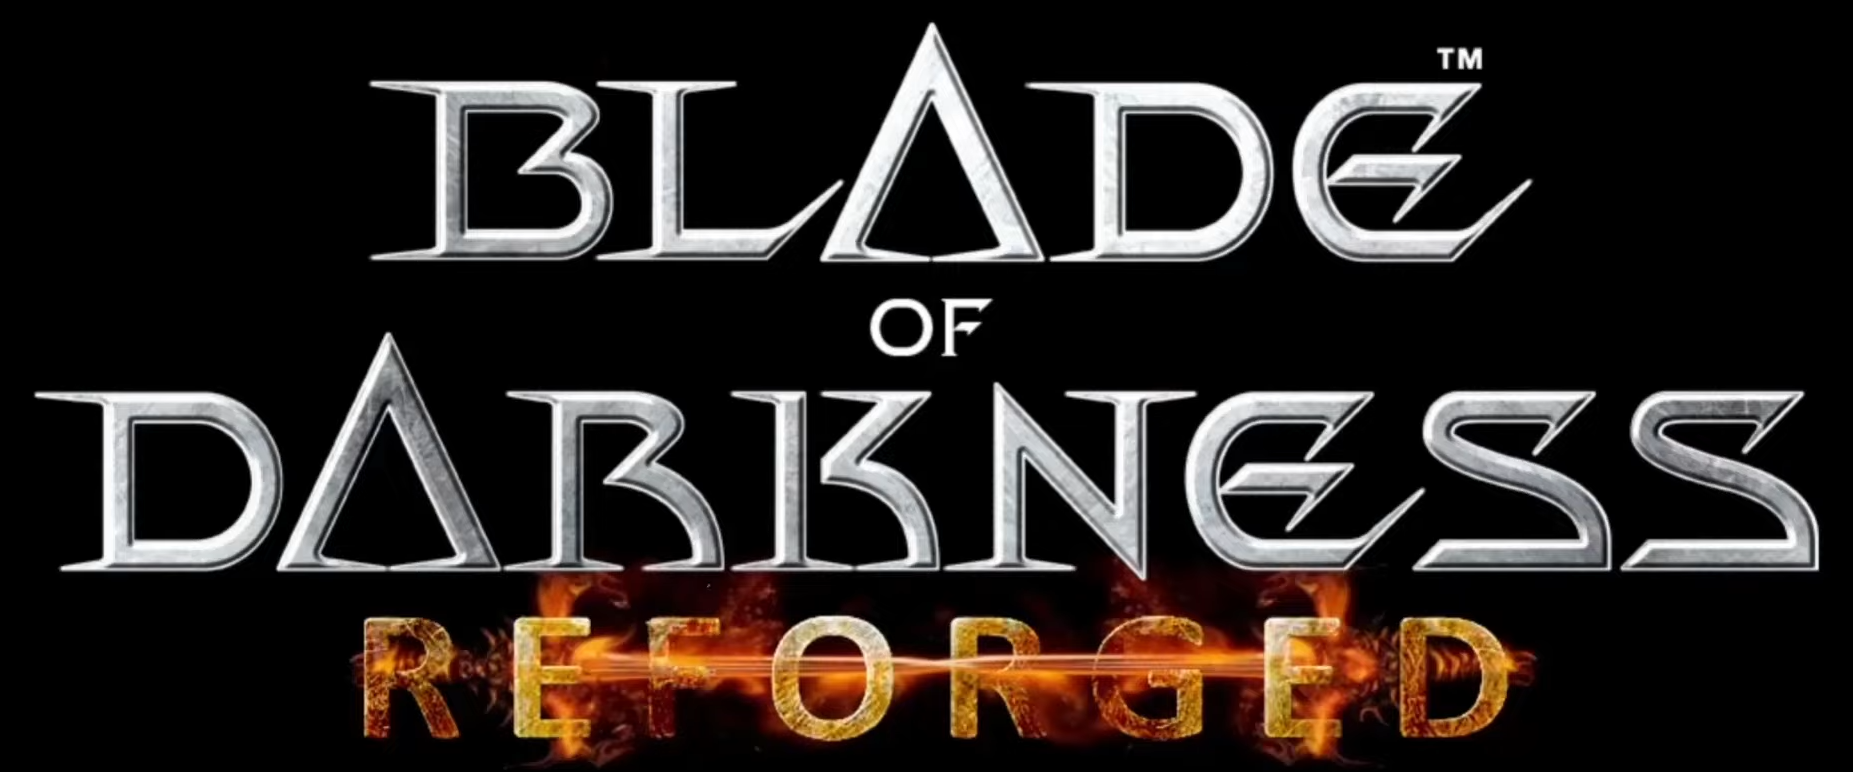 Blade of Darkness Reforged - by xSFBx image 1